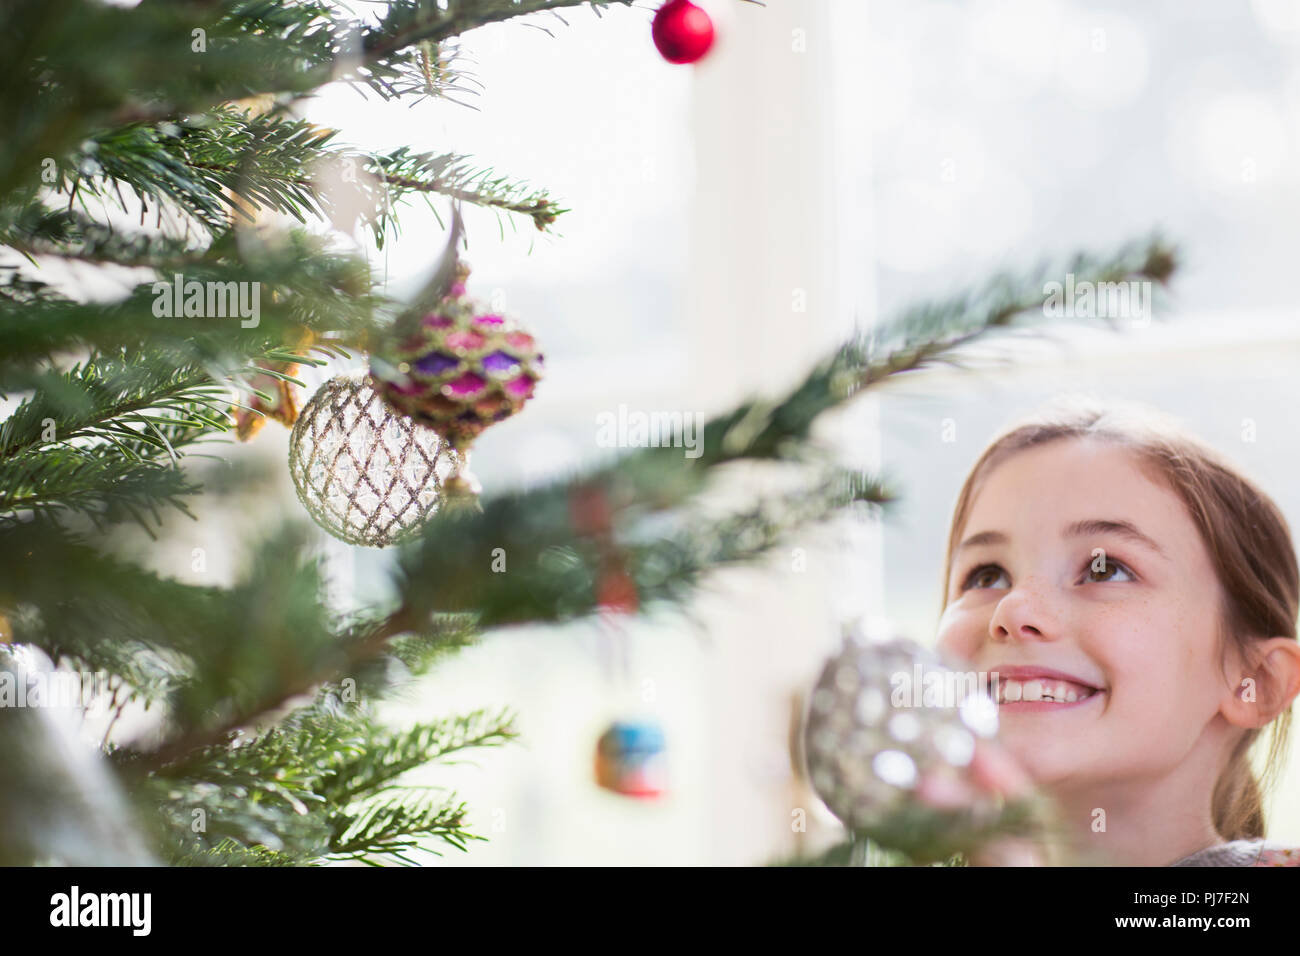 Smiling girl looking up at ornaments on Christmas tree Stock Photo